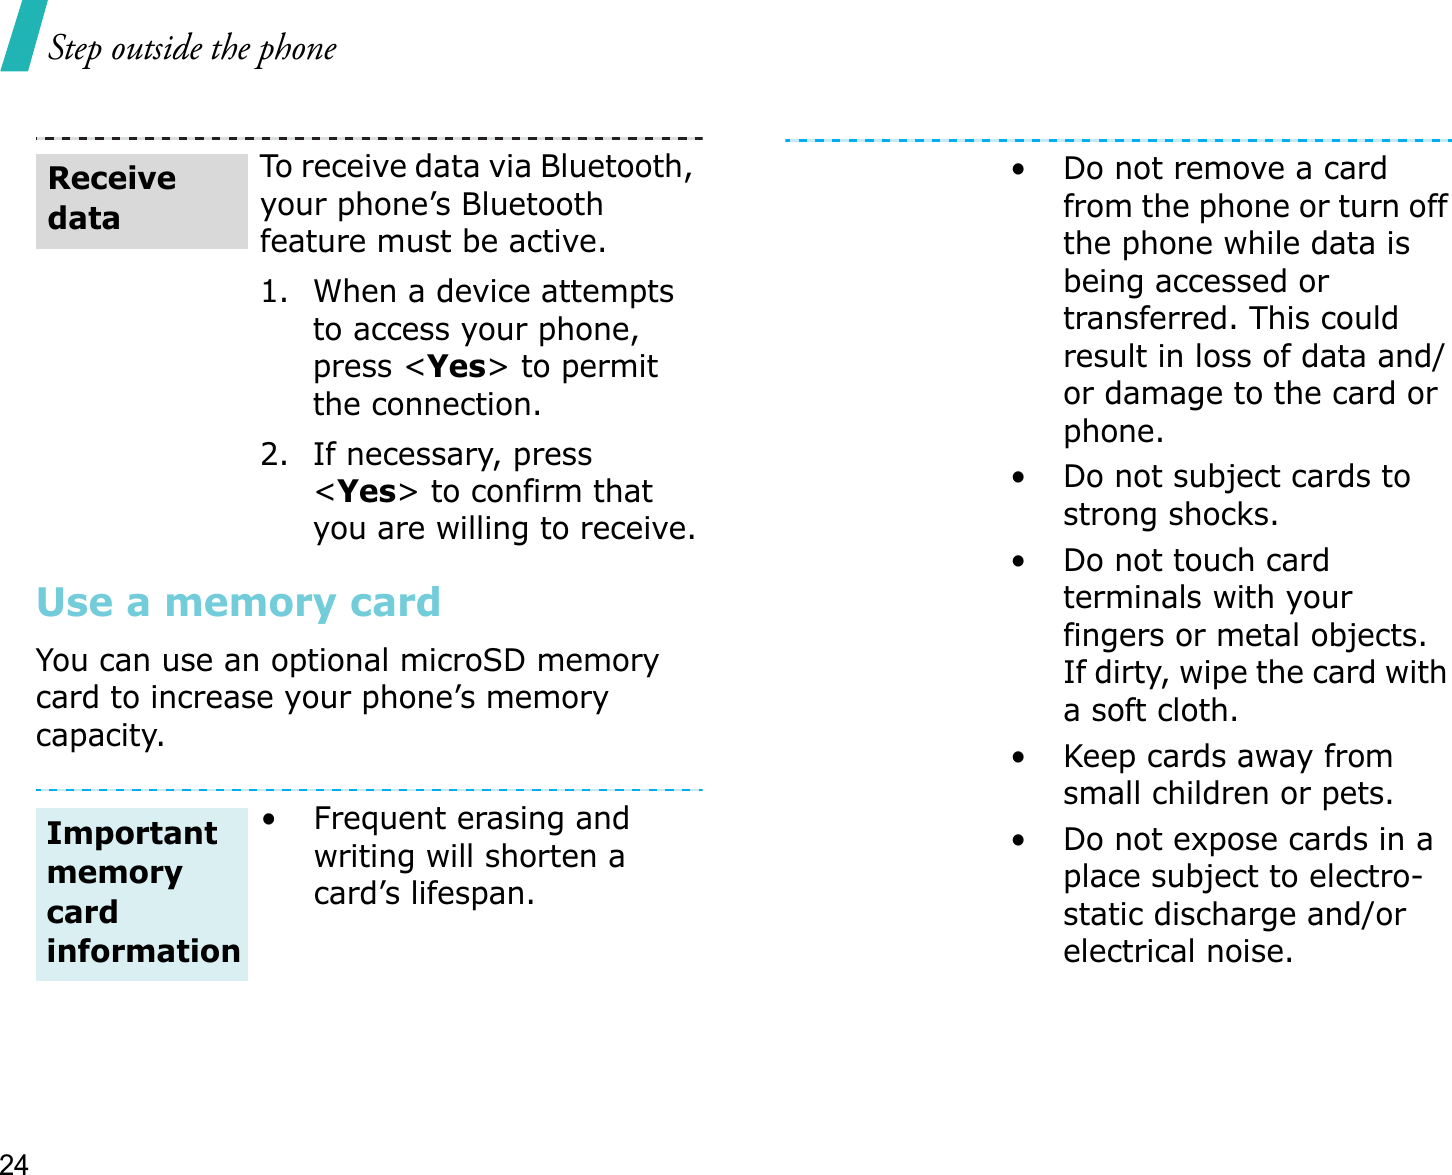 Step outside the phone24Use a memory cardYou can use an optional microSD memory card to increase your phone’s memory capacity. To receive data via Bluetooth, your phone’s Bluetooth feature must be active. 1. When a device attempts to access your phone, press &lt;Yes&gt; to permit the connection.2. If necessary, press &lt;Yes&gt; to confirm that you are willing to receive.• Frequent erasing and writing will shorten a card’s lifespan.Receive dataImportant memory card information• Do not remove a card from the phone or turn off the phone while data is being accessed or transferred. This could result in loss of data and/or damage to the card or phone.• Do not subject cards to strong shocks.• Do not touch card terminals with your fingers or metal objects. If dirty, wipe the card with a soft cloth.• Keep cards away from small children or pets.• Do not expose cards in a place subject to electro-static discharge and/or electrical noise.